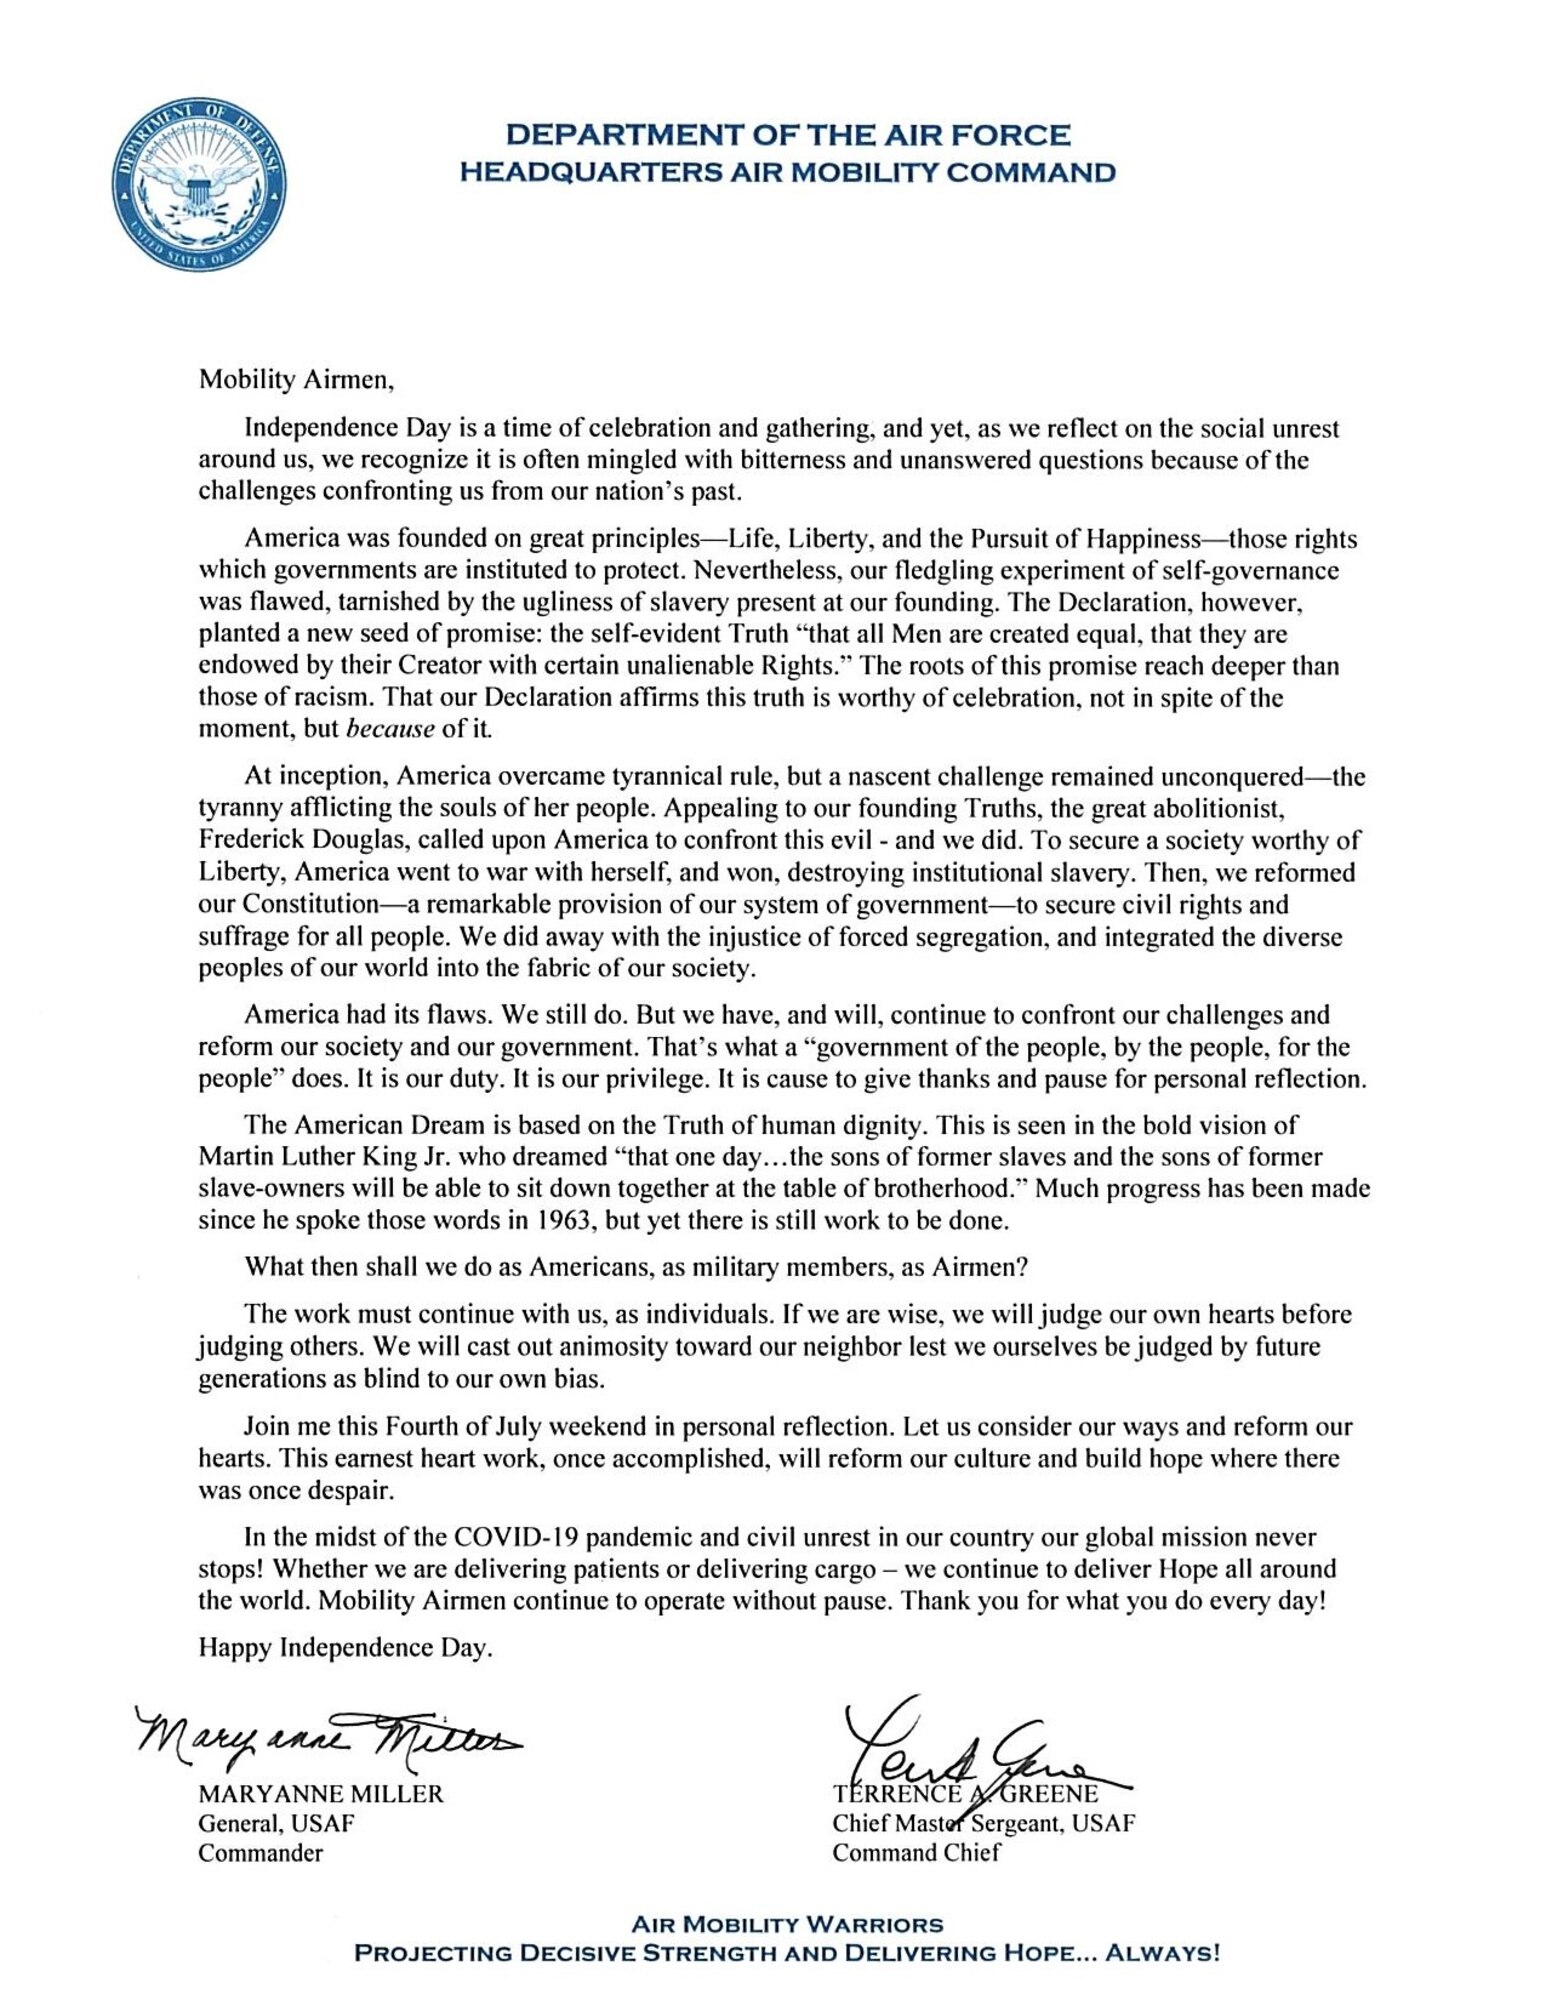 Independence Day message from General Maryanne Miller, Air Mobility Command Commander.